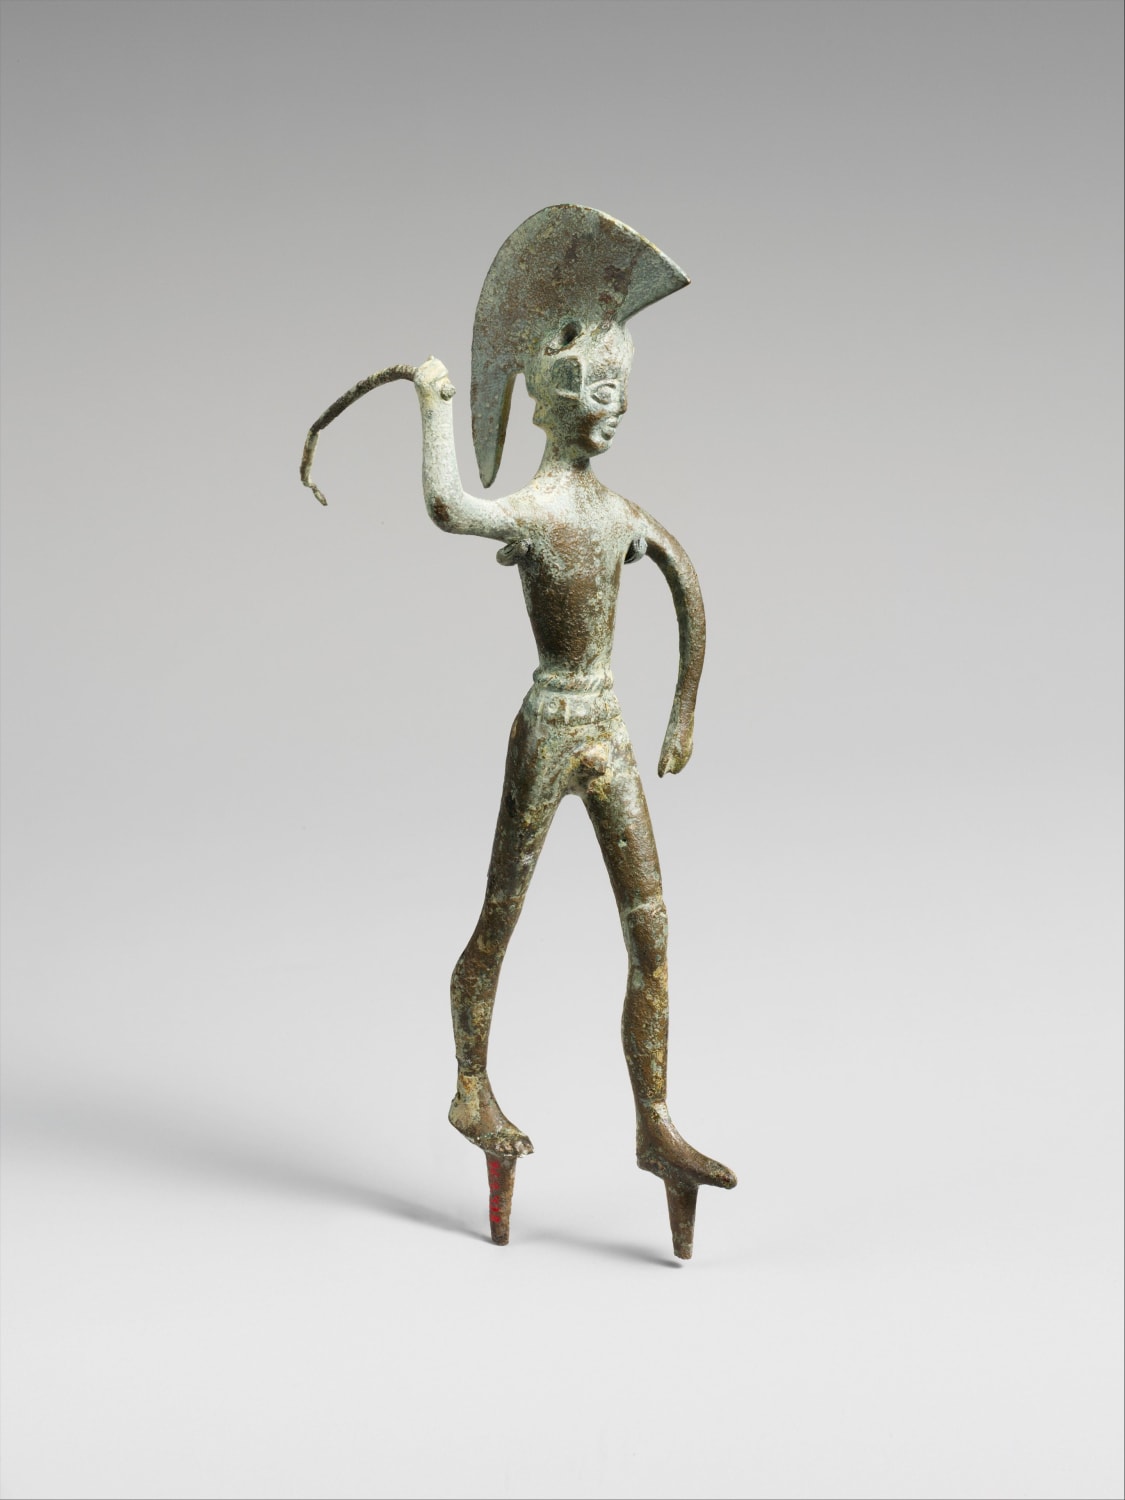 Ancient Etruscan bronze statuette of a warrior with a bent/partly missing spear, c. 5th century BCE.